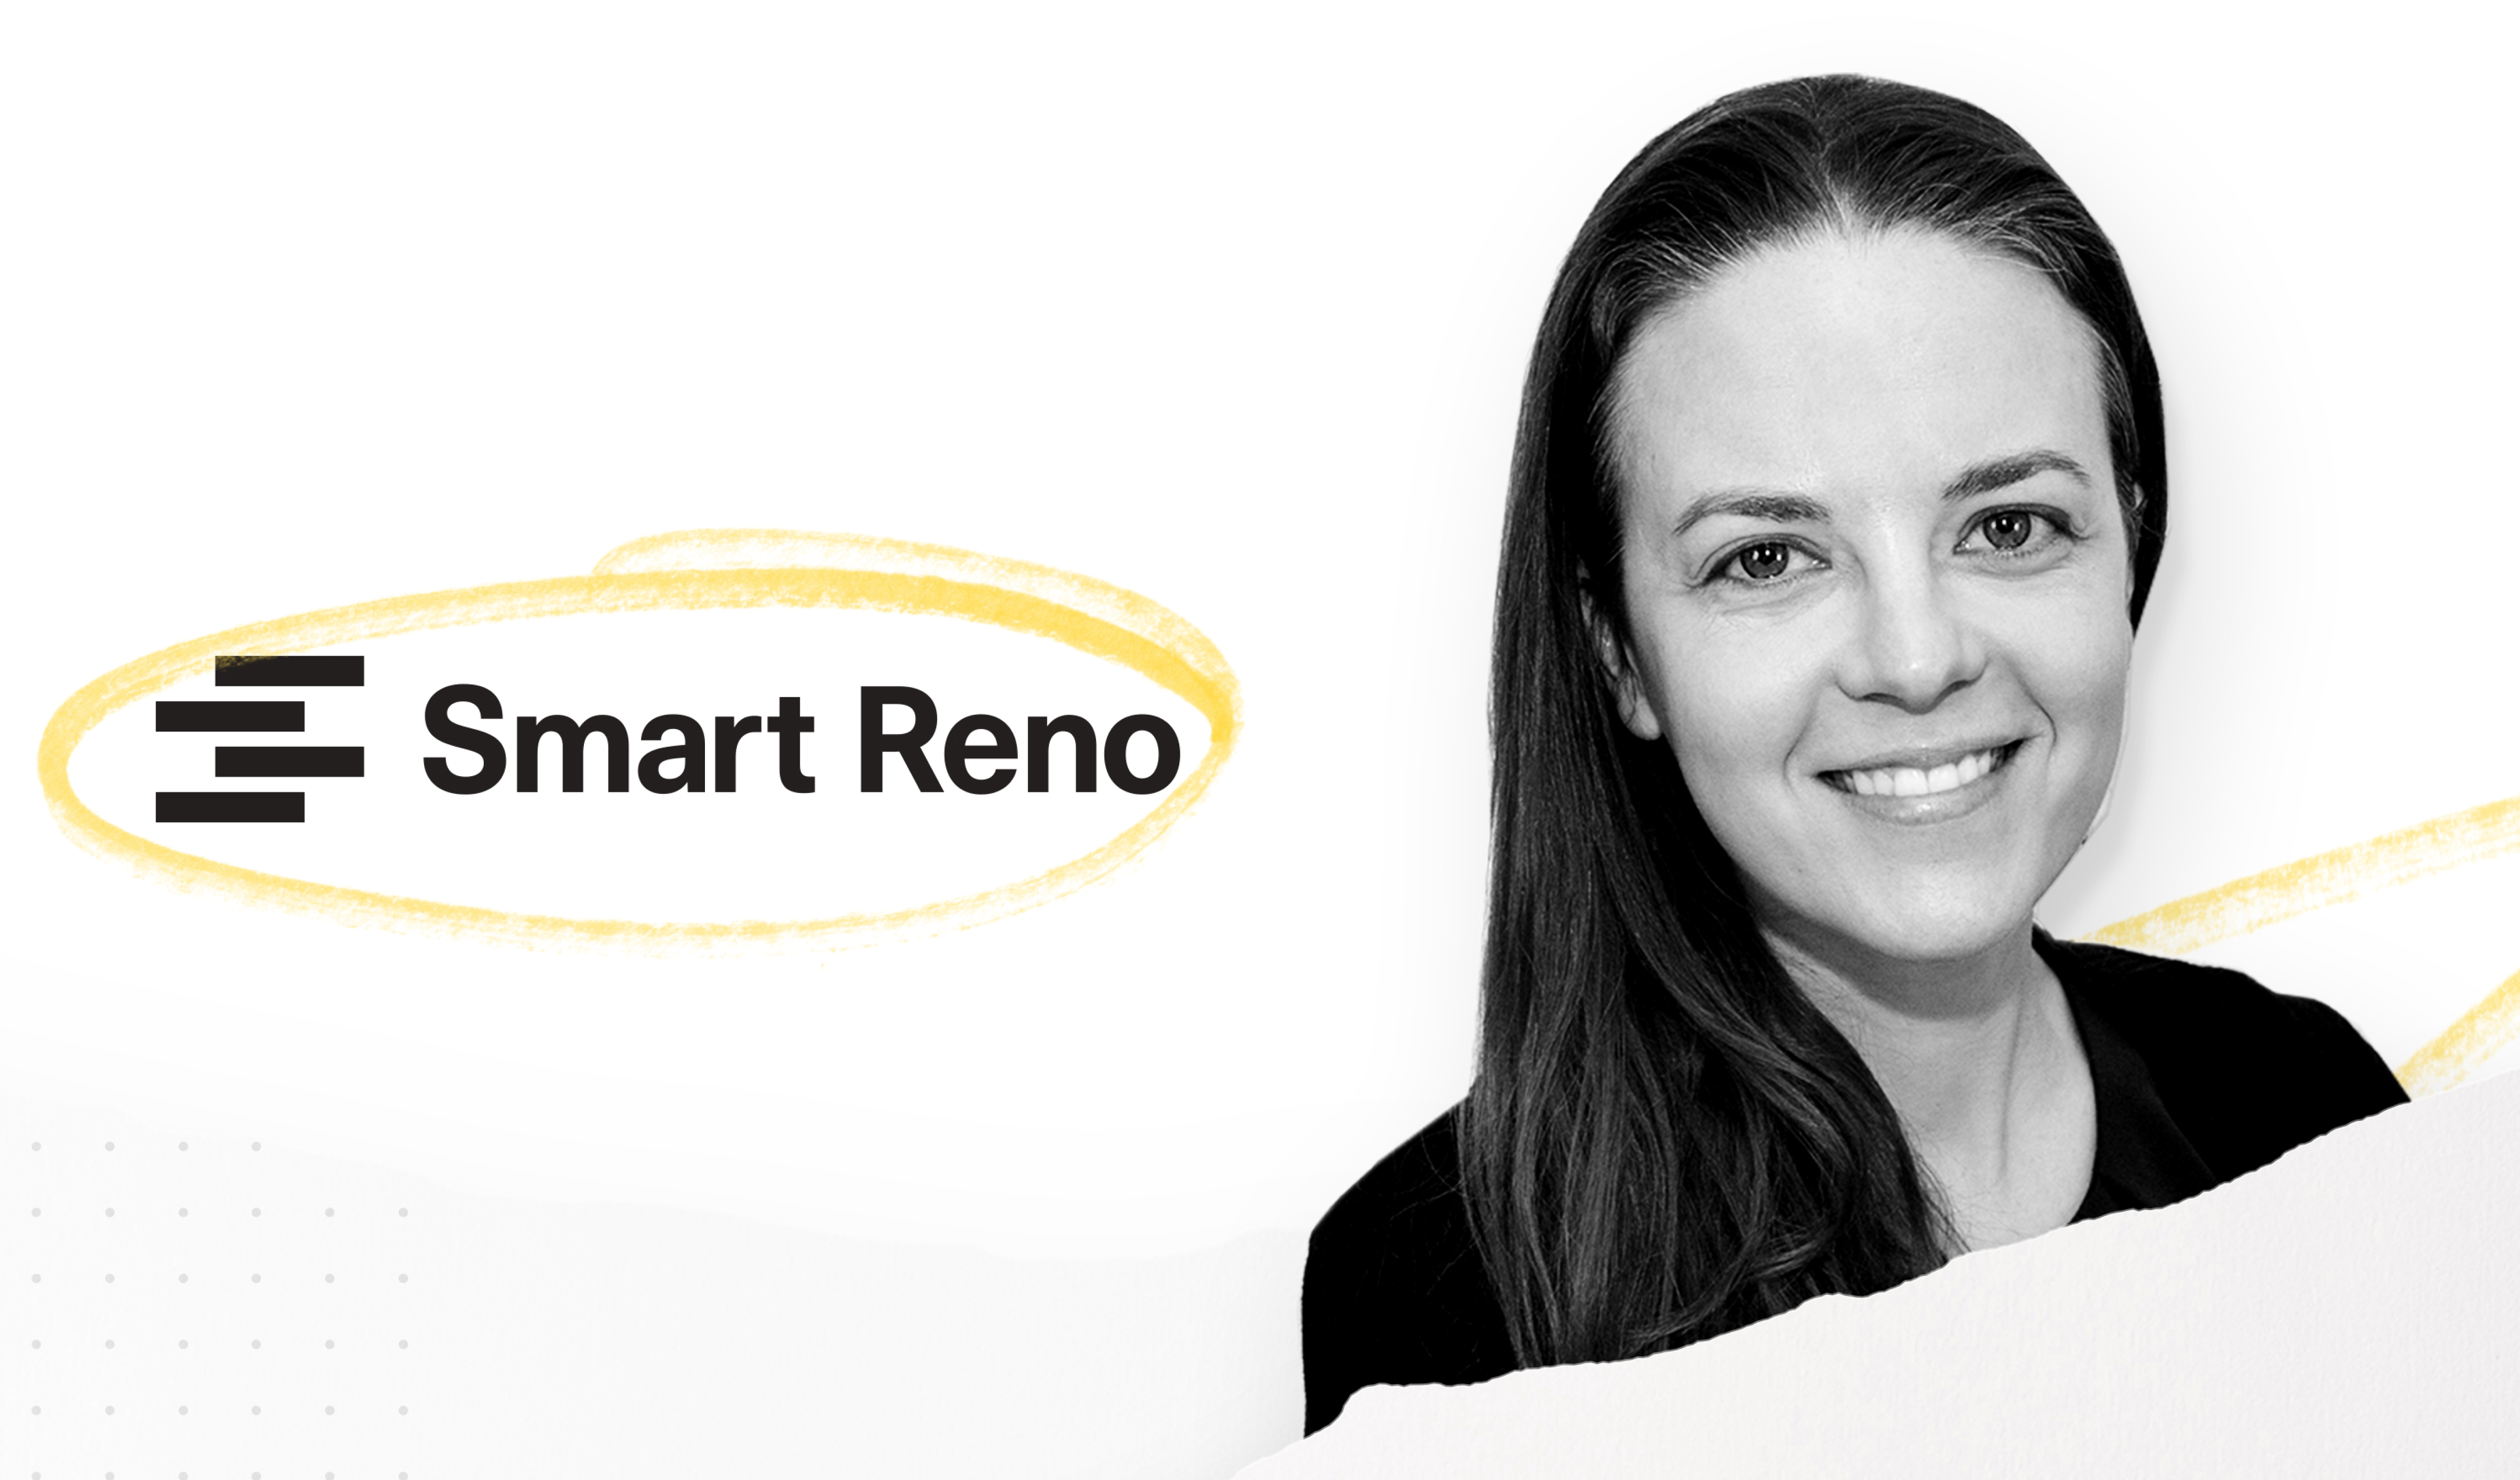 Smart Reno: How It’s Making Home Renovations Easier